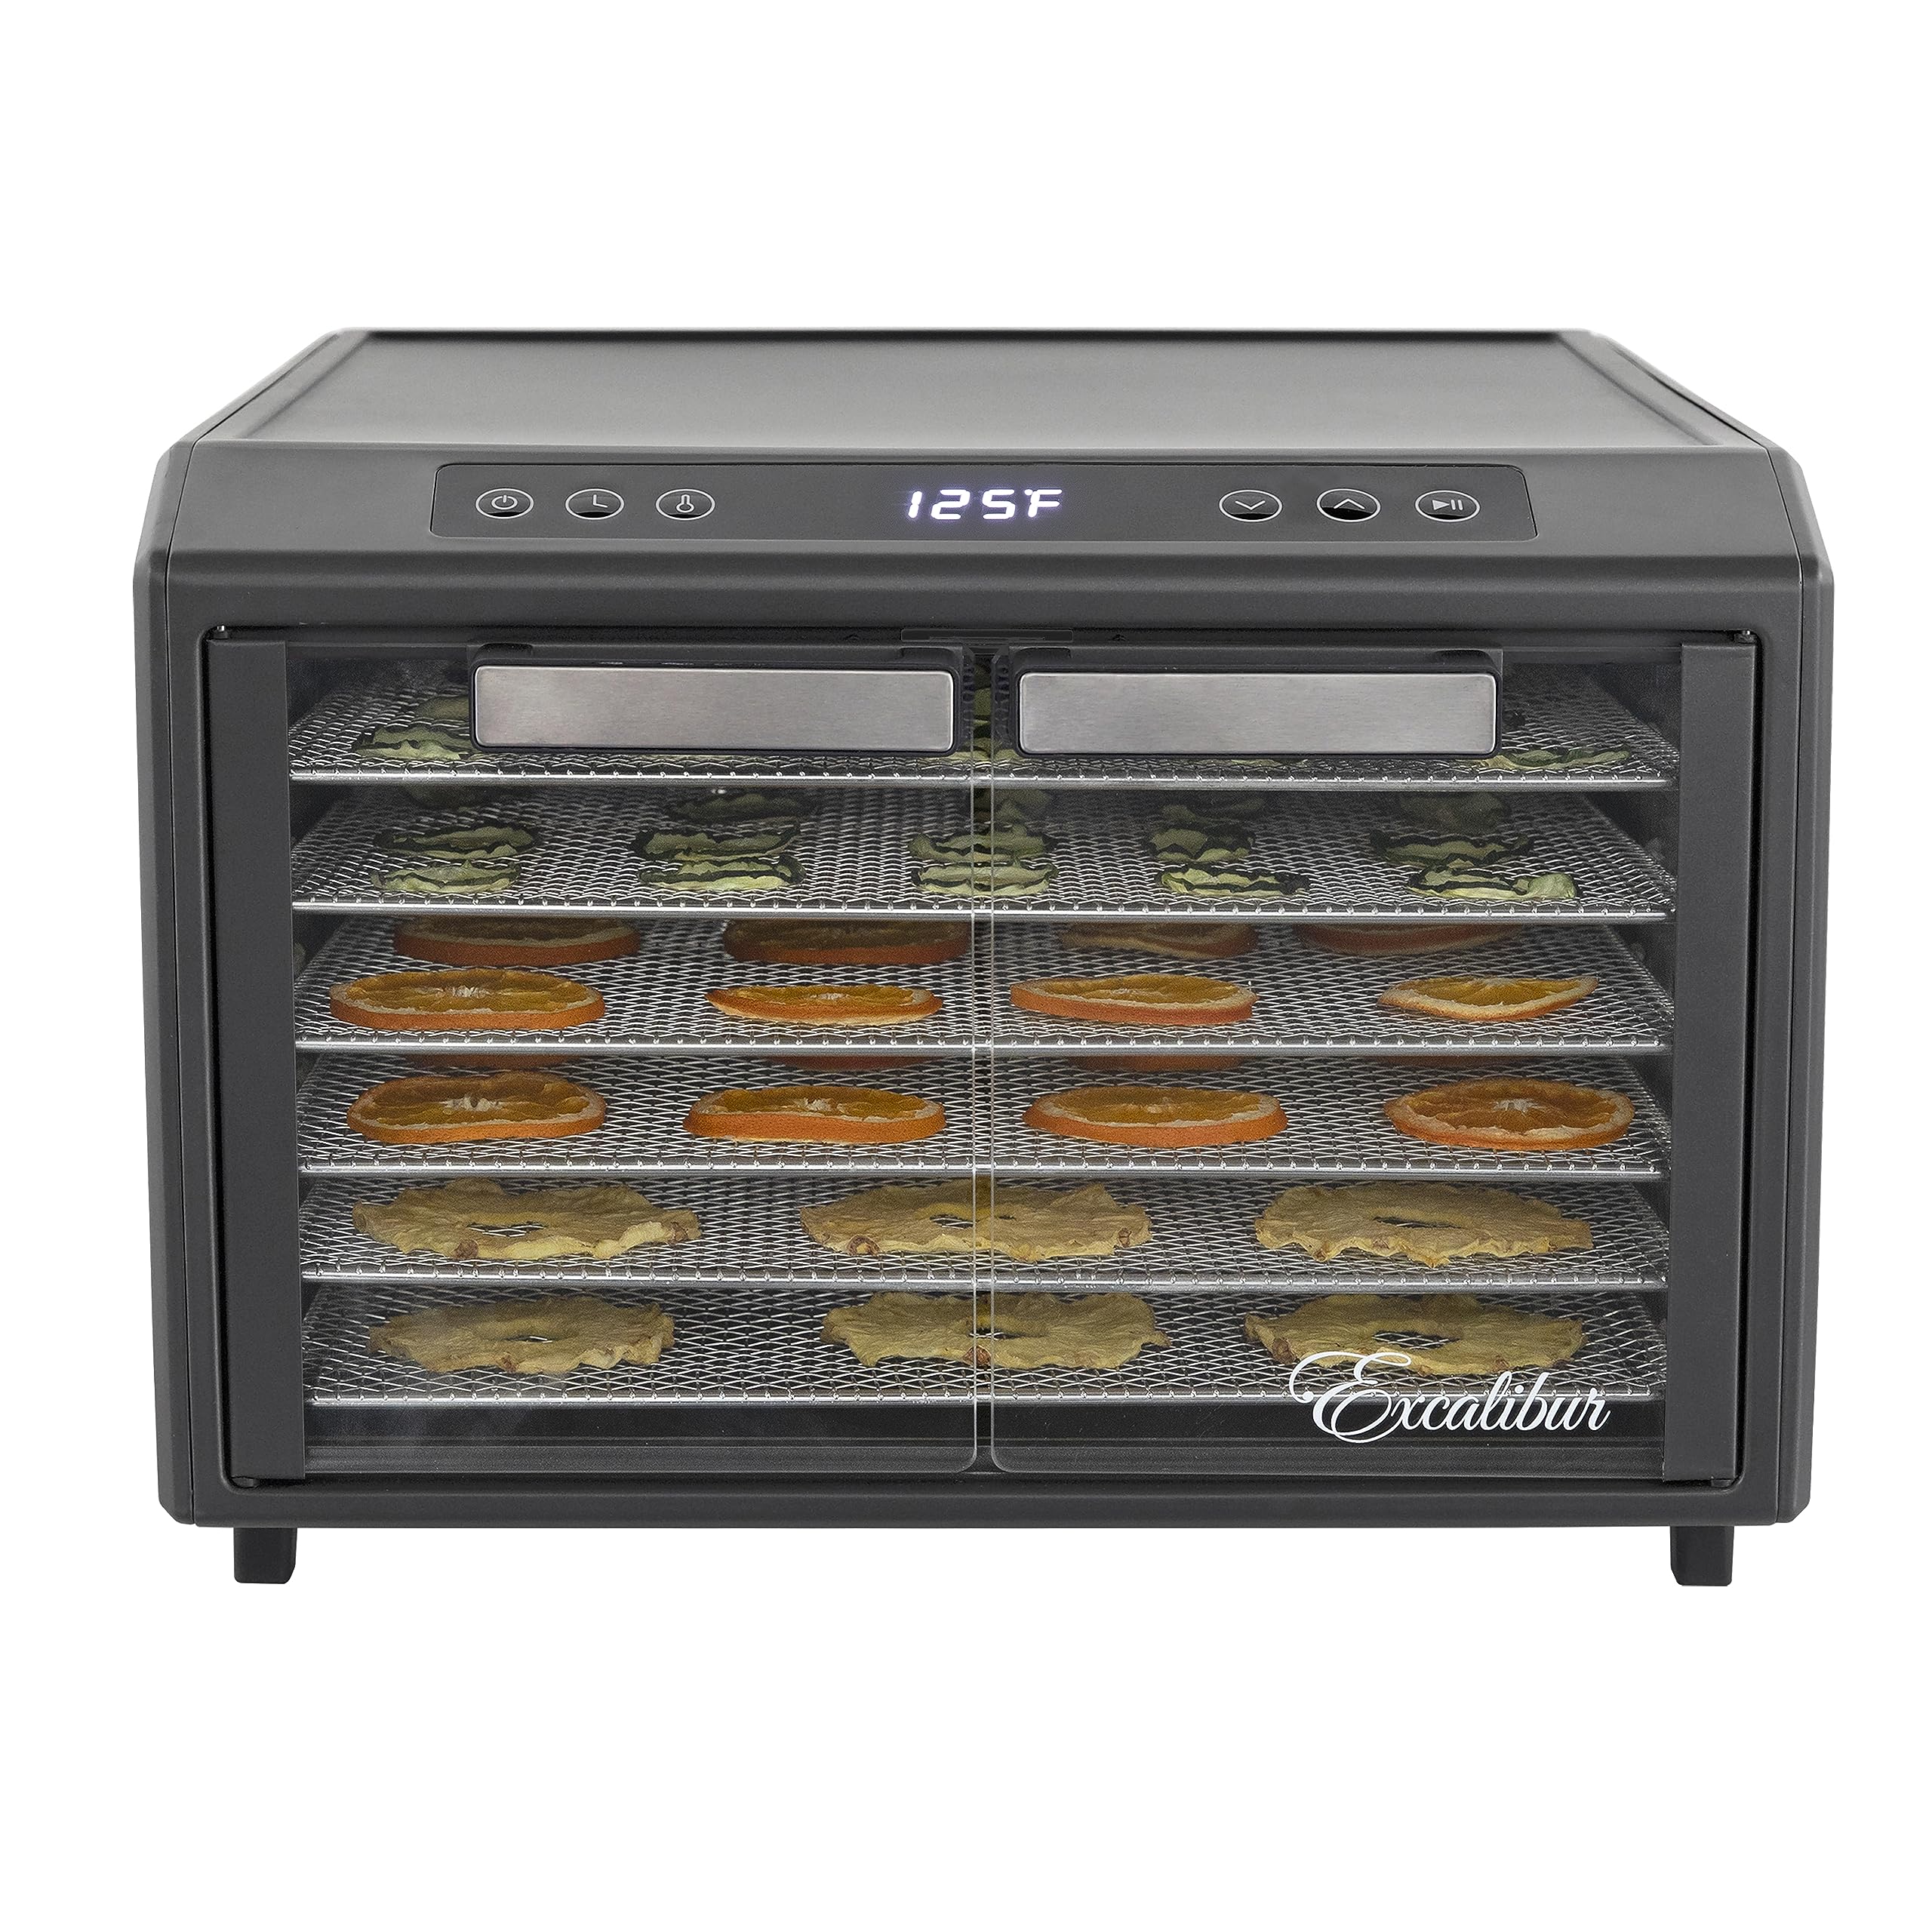 Excalibur Electric Food Dehydrator Select Series 6-Tray with Adjustable Temperature Control Includes Chrome Plated Drying Trays Stainless Steel Construction and Glass French Doors, 700-Watts, Black